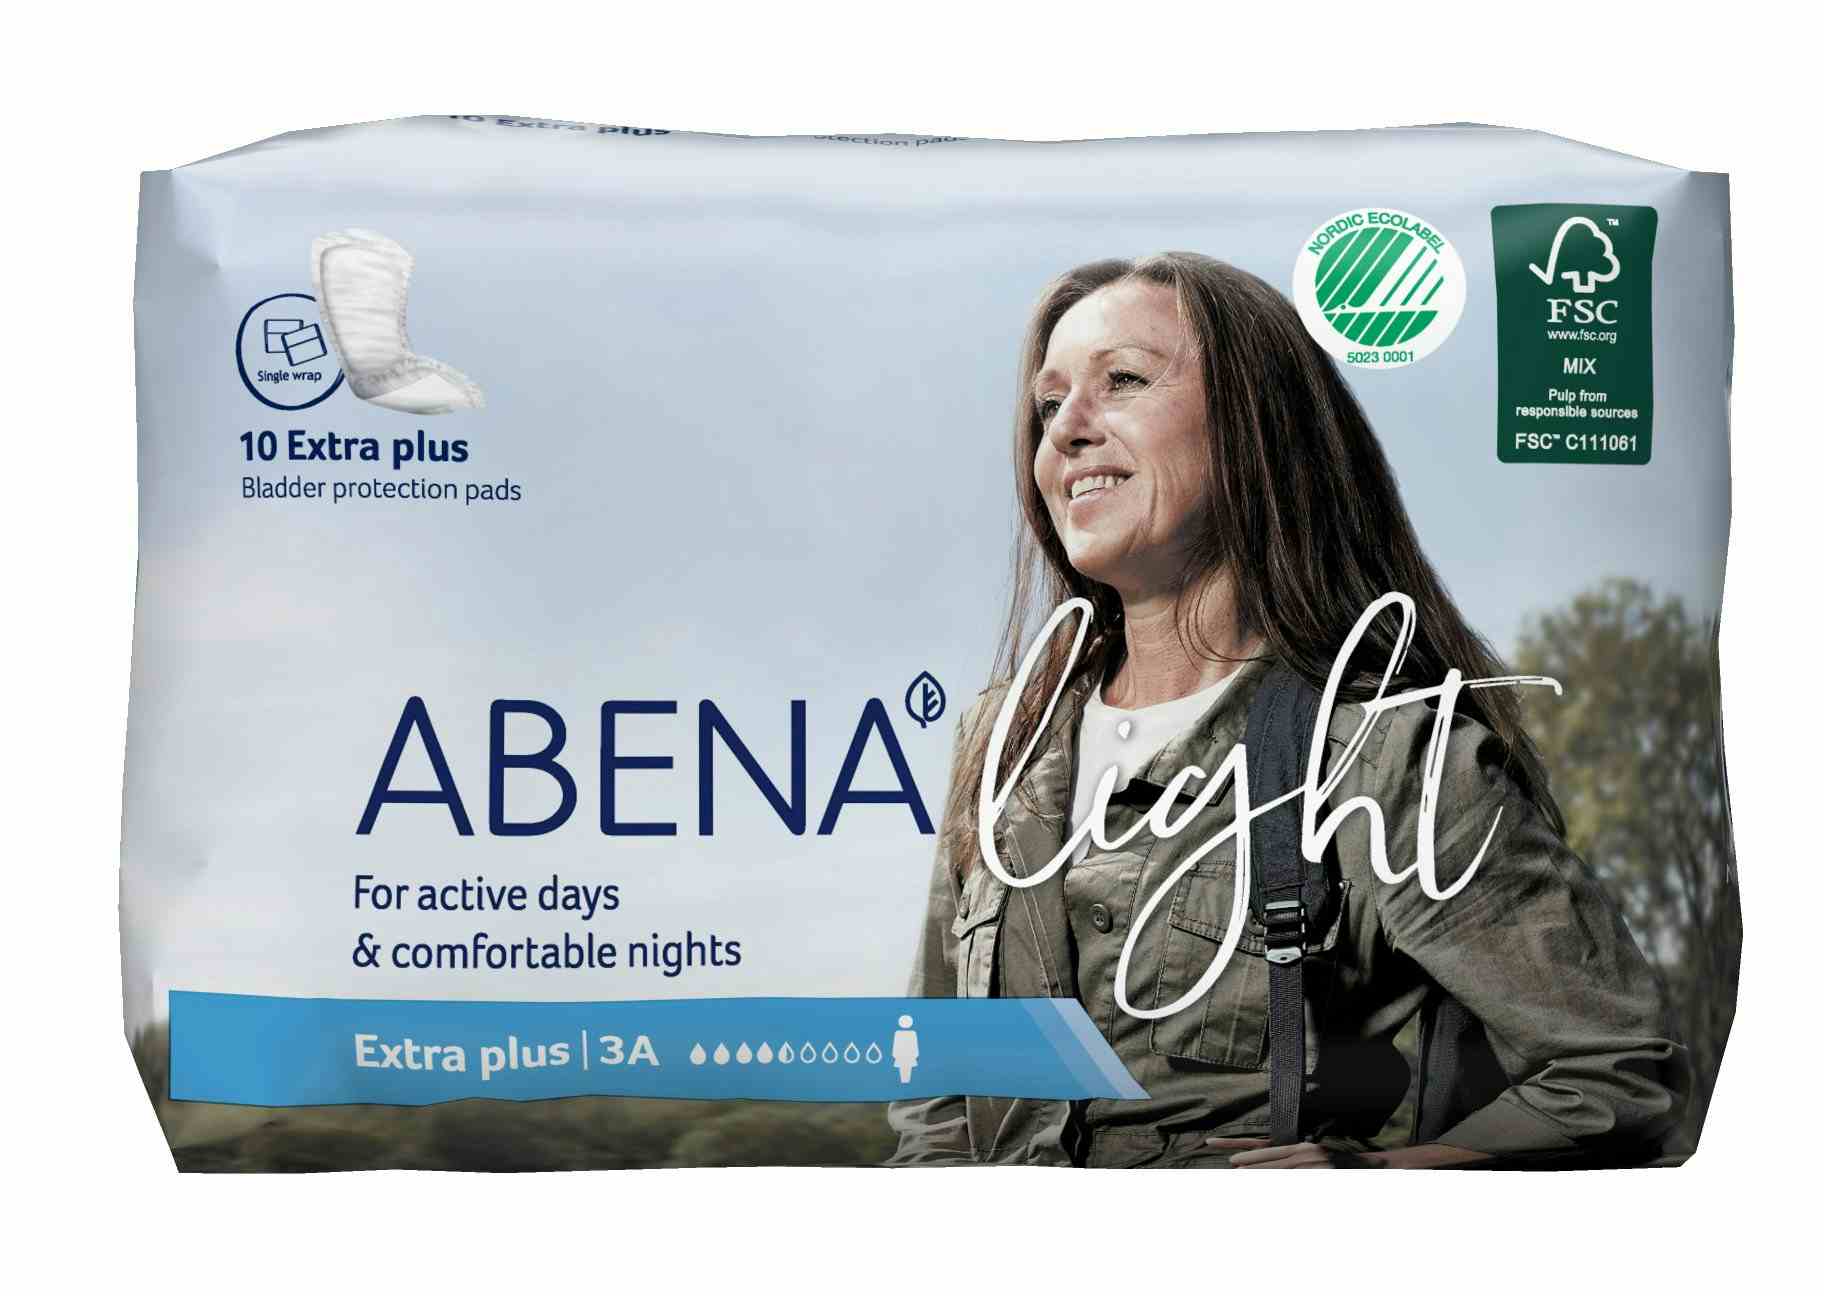 Abena Light Extra Plus Disposable Unisex Adult Bladder Control Pad, Moderate Absorbency, 1000017159, One Size Fits Most -  Case of 200 Pads (20 Bags)